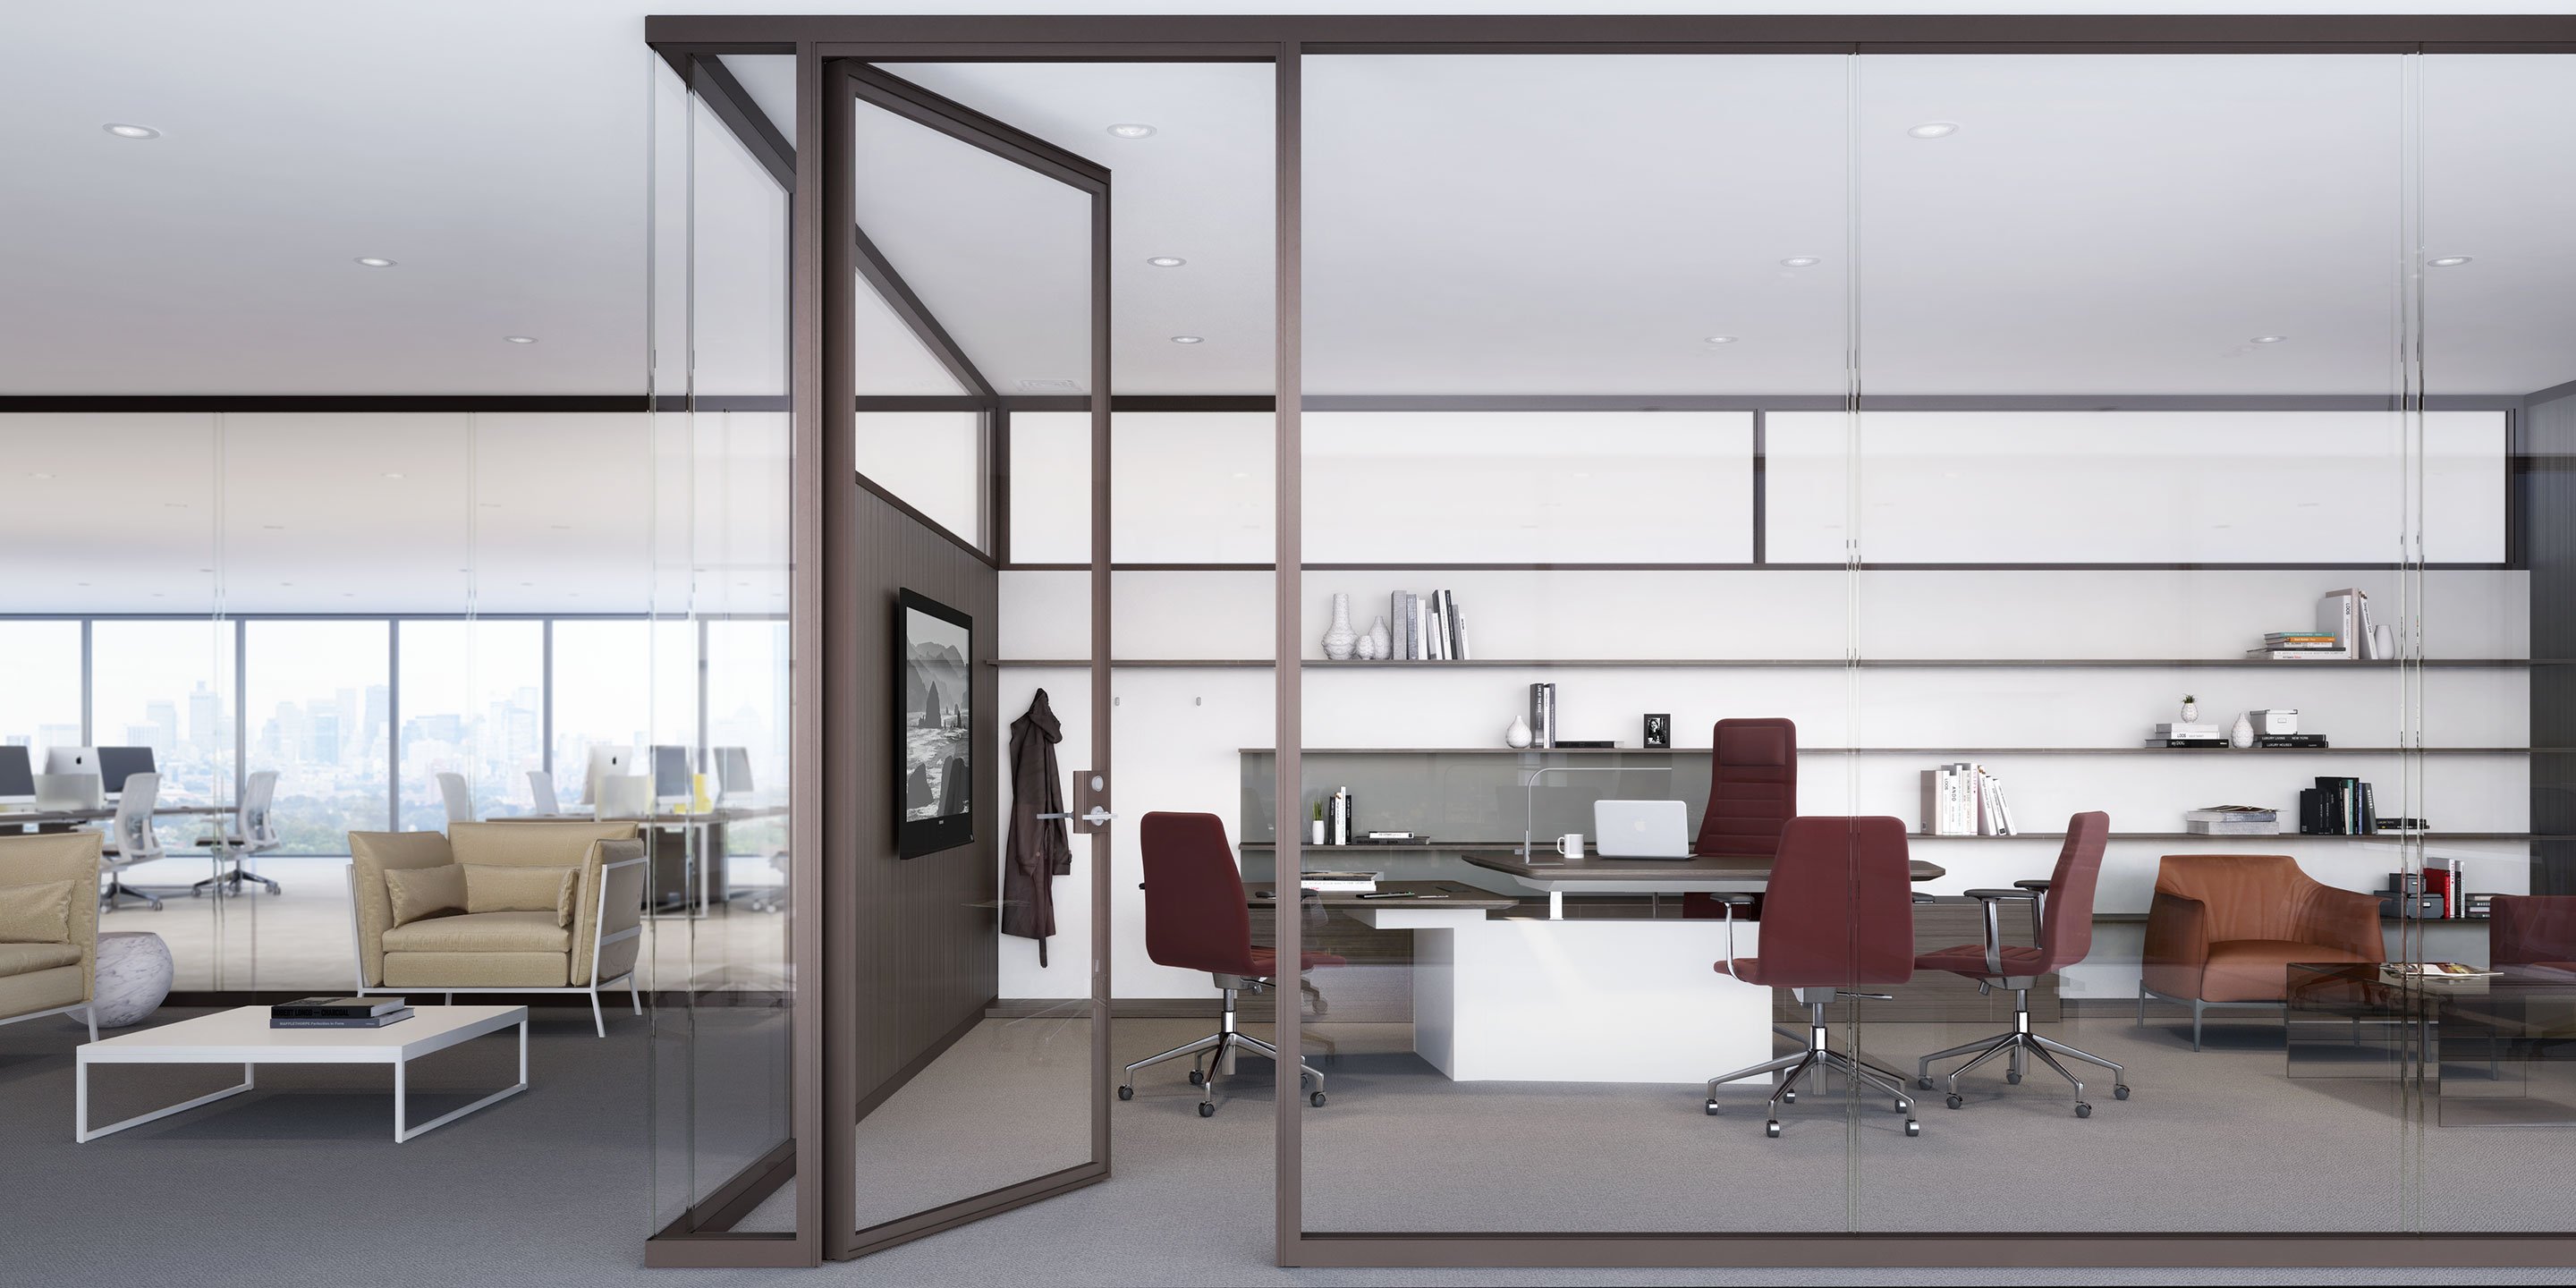 Haworth Trivati Wall for private executive office with red chairs and veneer executive desk in open office space